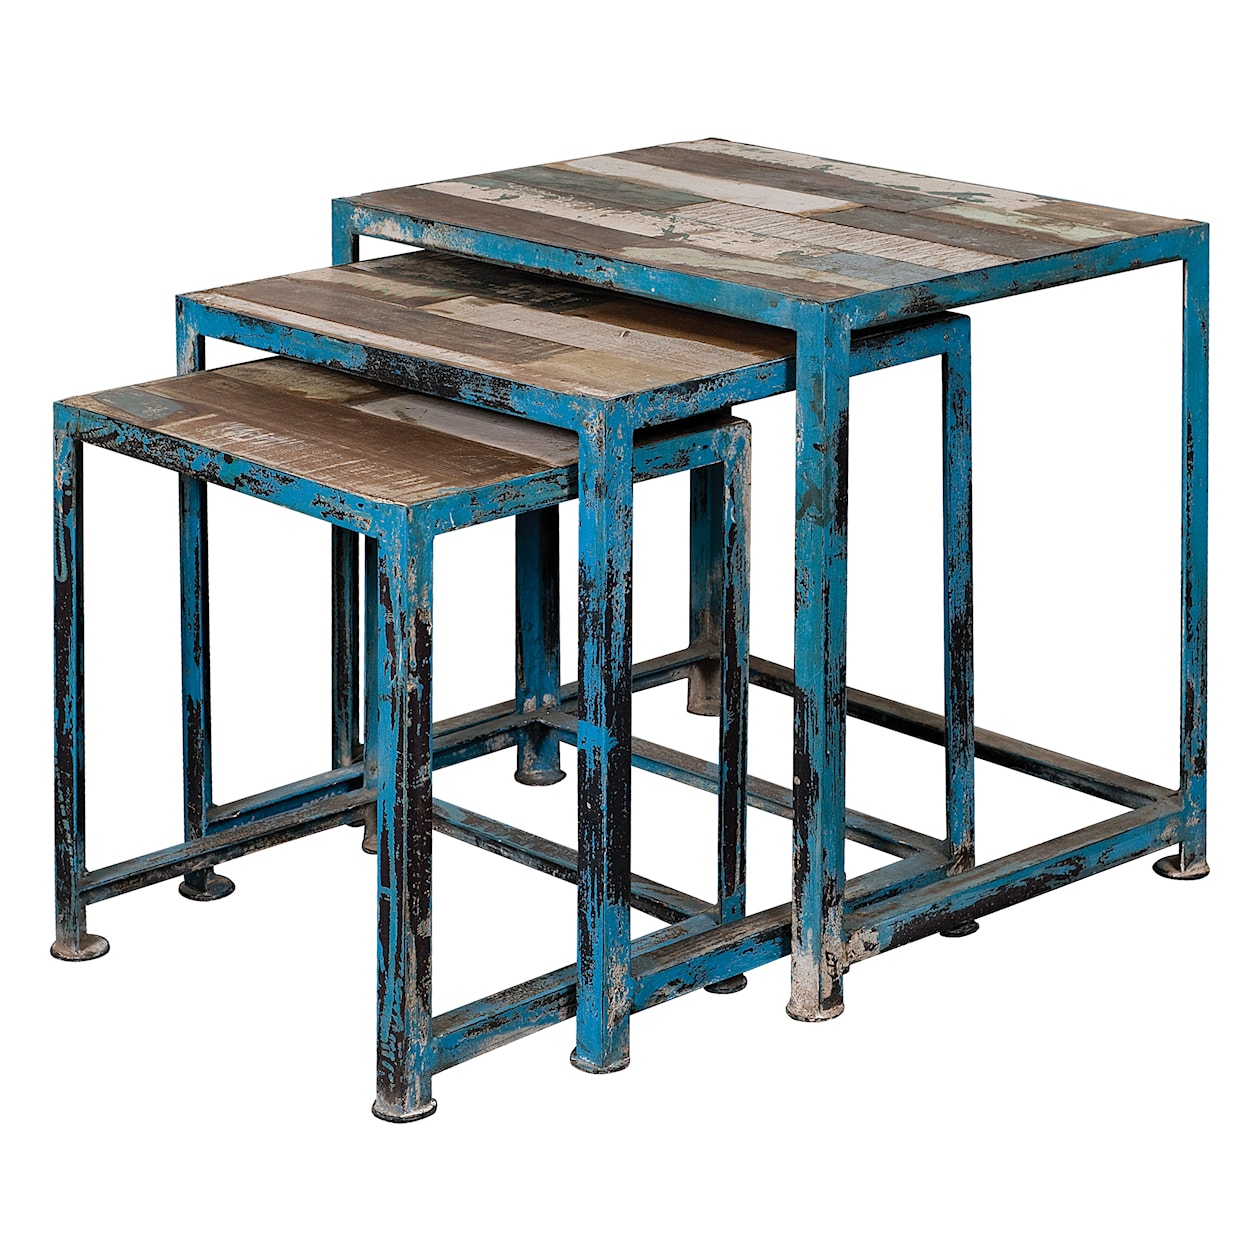 Coast2Coast Home Occasional Accents Set of Three Nesting Tables - Reclaimed